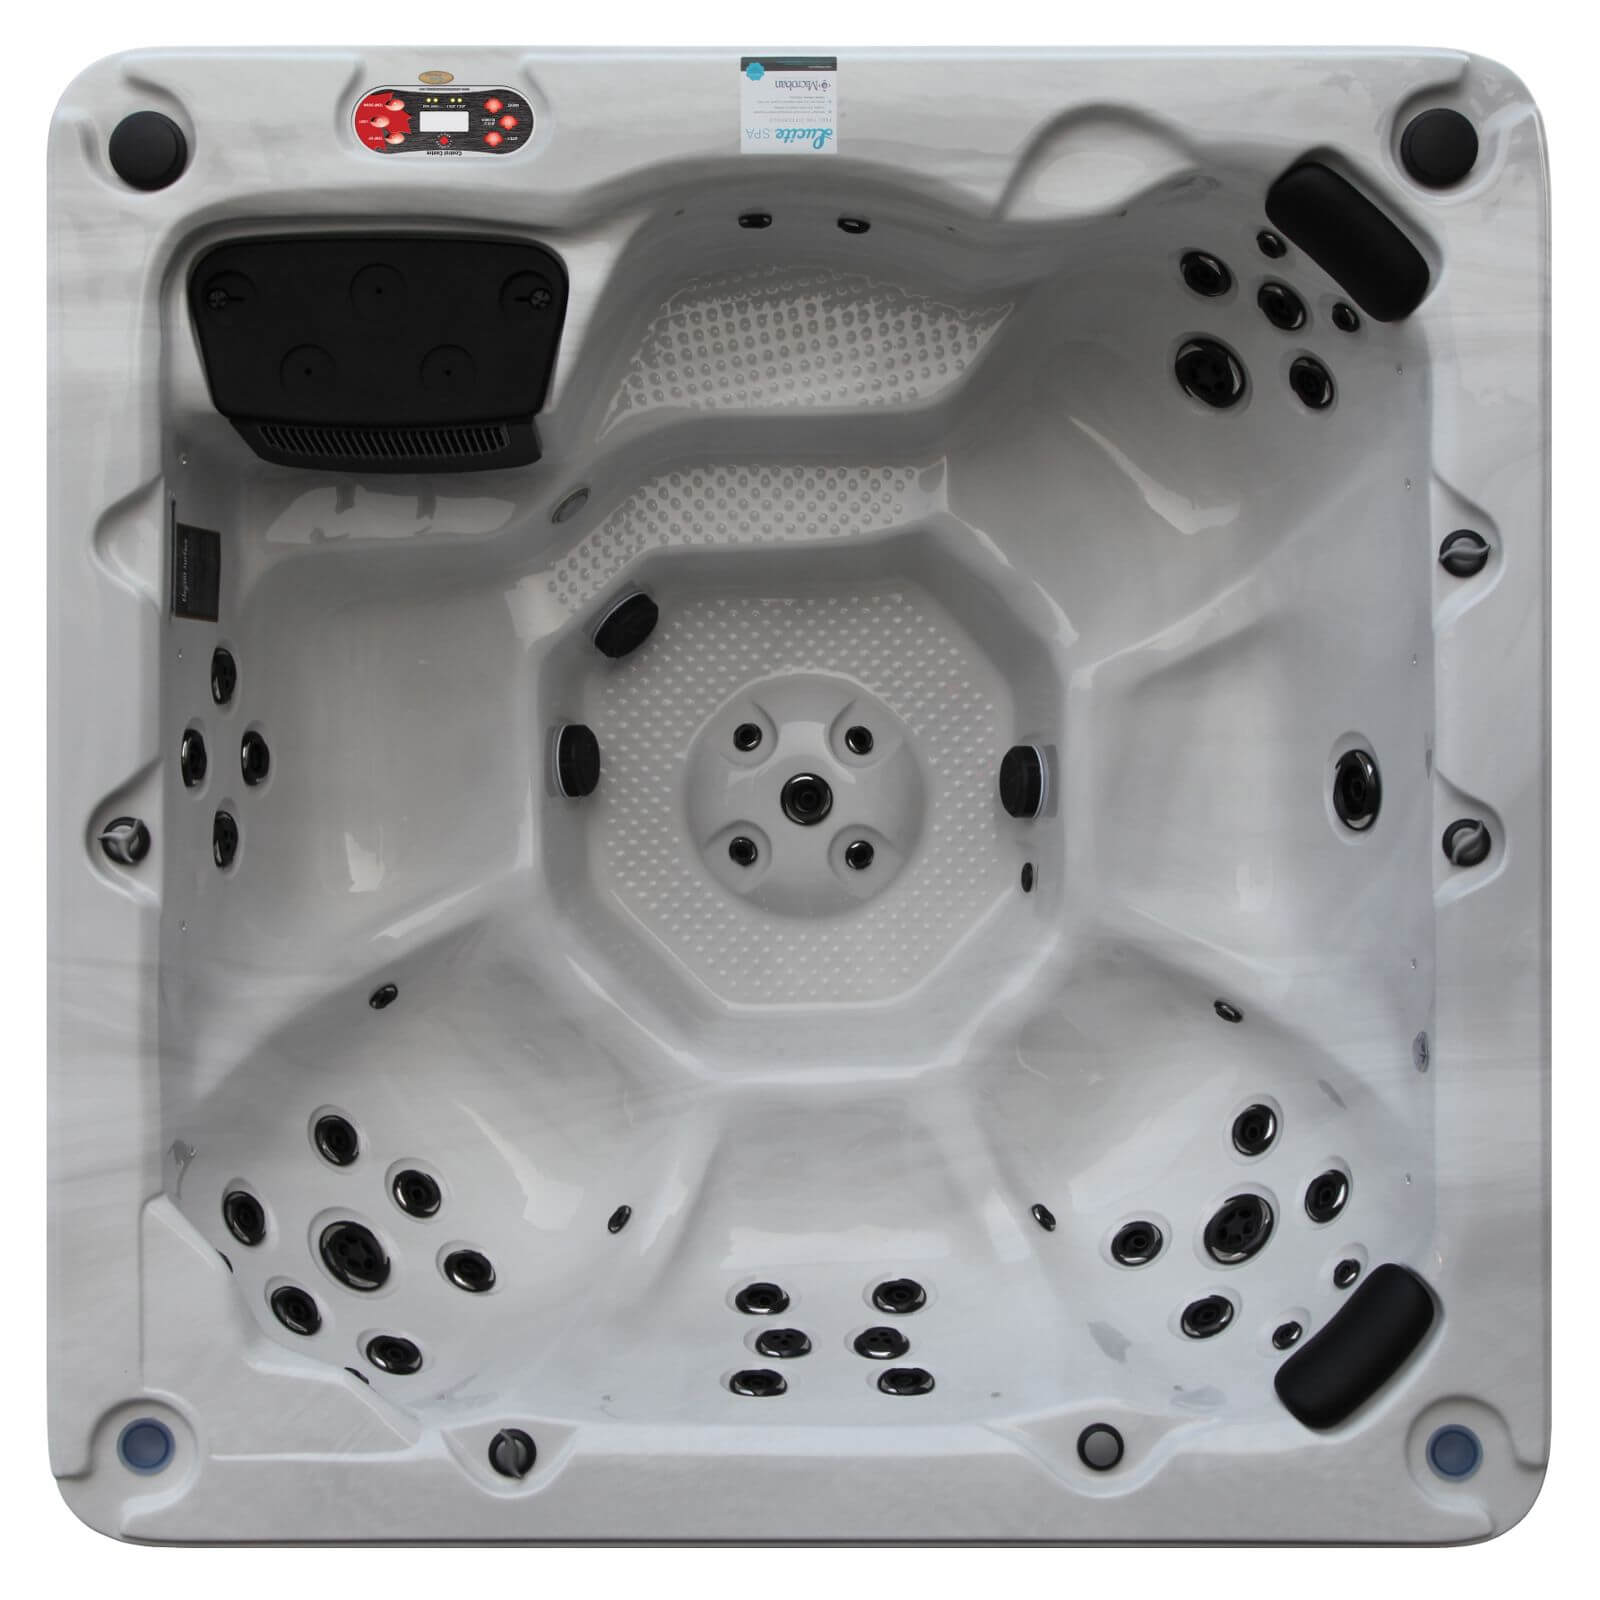 Canadian Spa Victoria 6-7 Person Hot Tub (Includes Free Delivery and Installation)